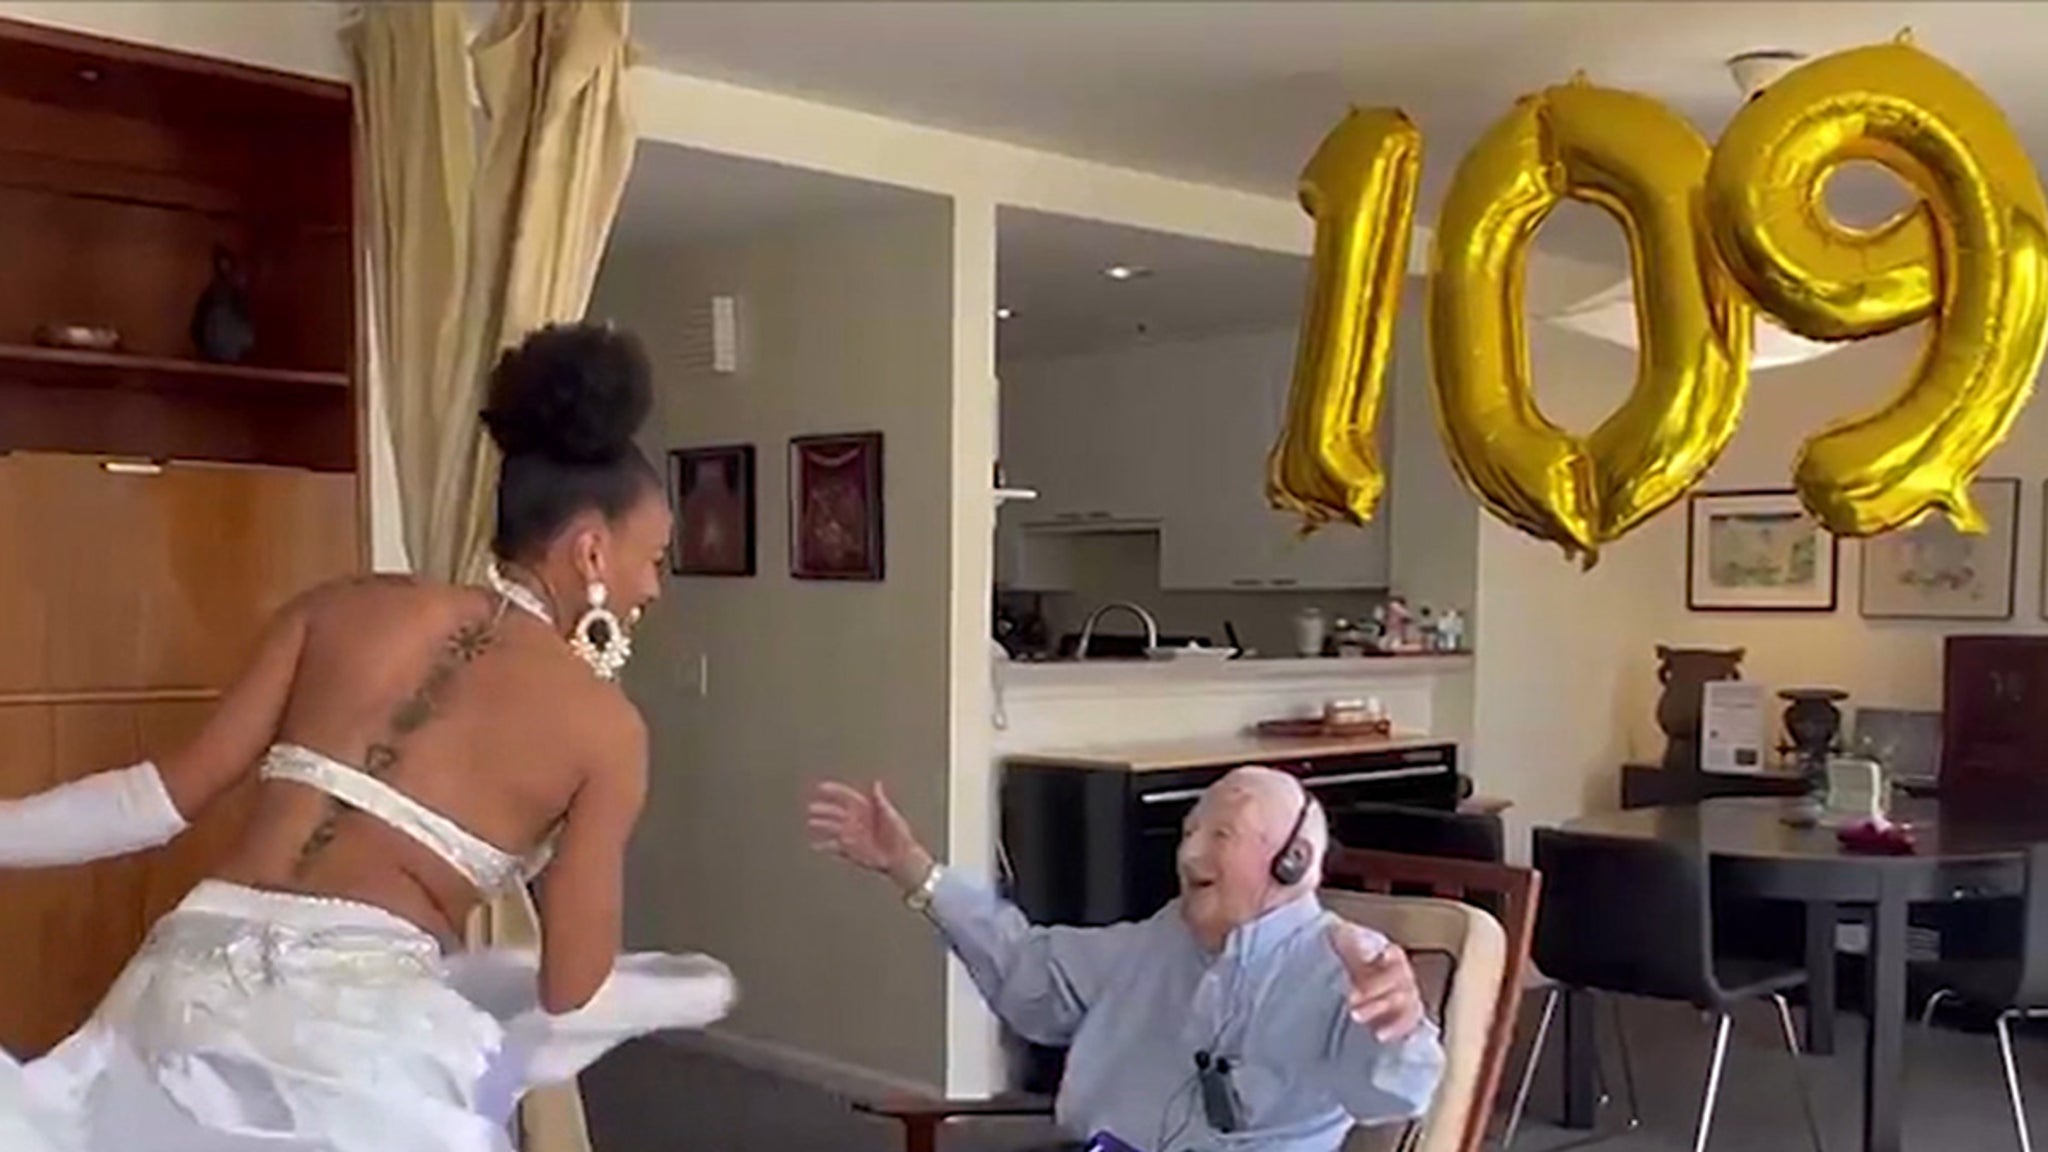 109-Year-Old Man Celebrates Birthday With A Belly Dancer